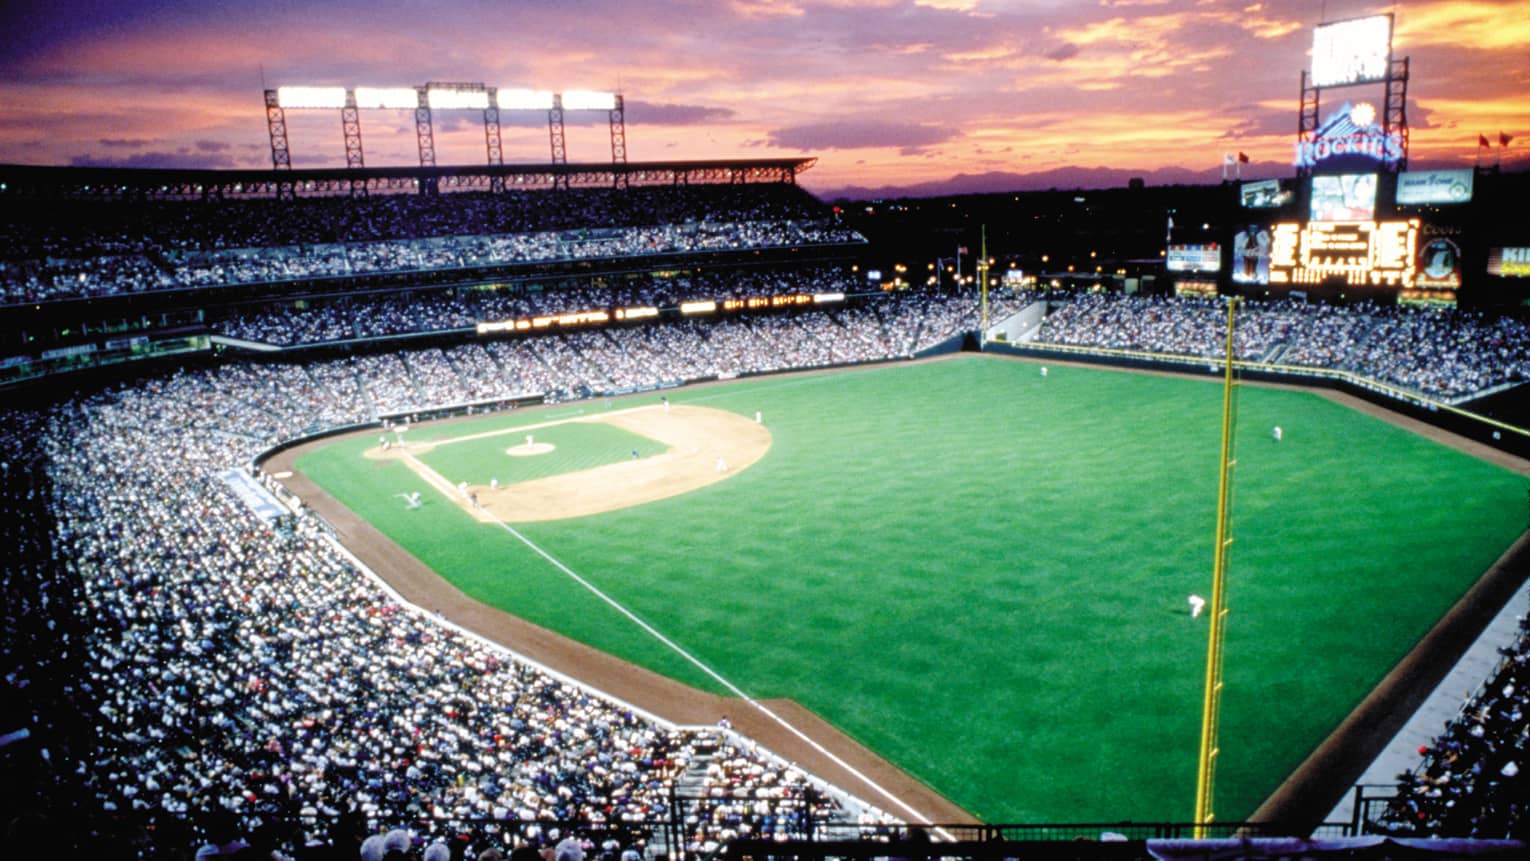 Aerial view of Coors Field sports stadium at sunset, crowds in stands